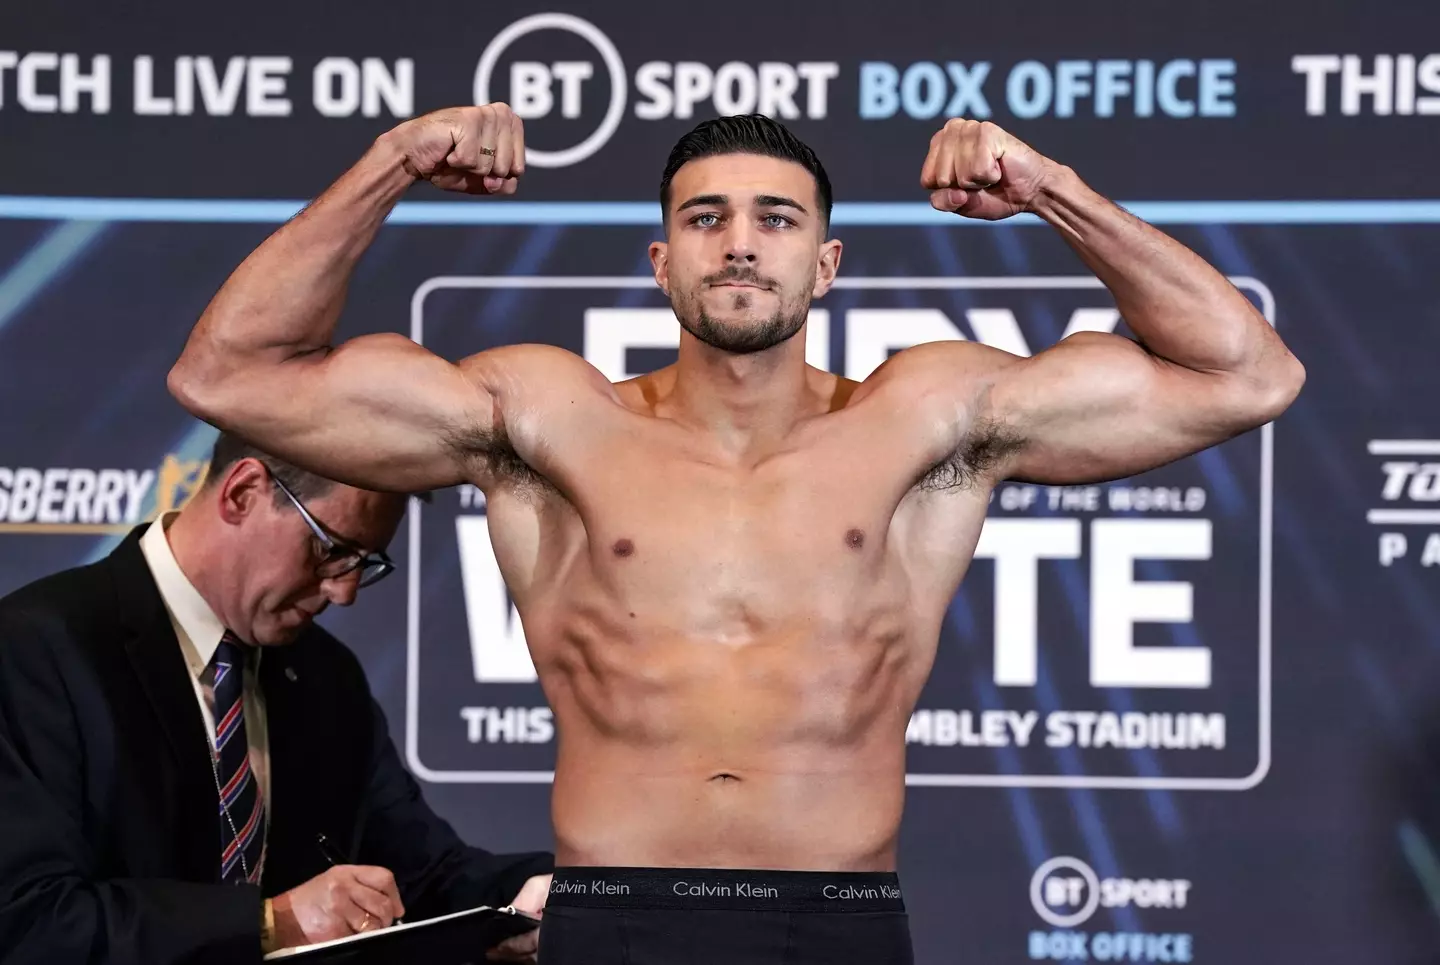 Tommy Fury will now hope to reach the heights of his brother Tyson.